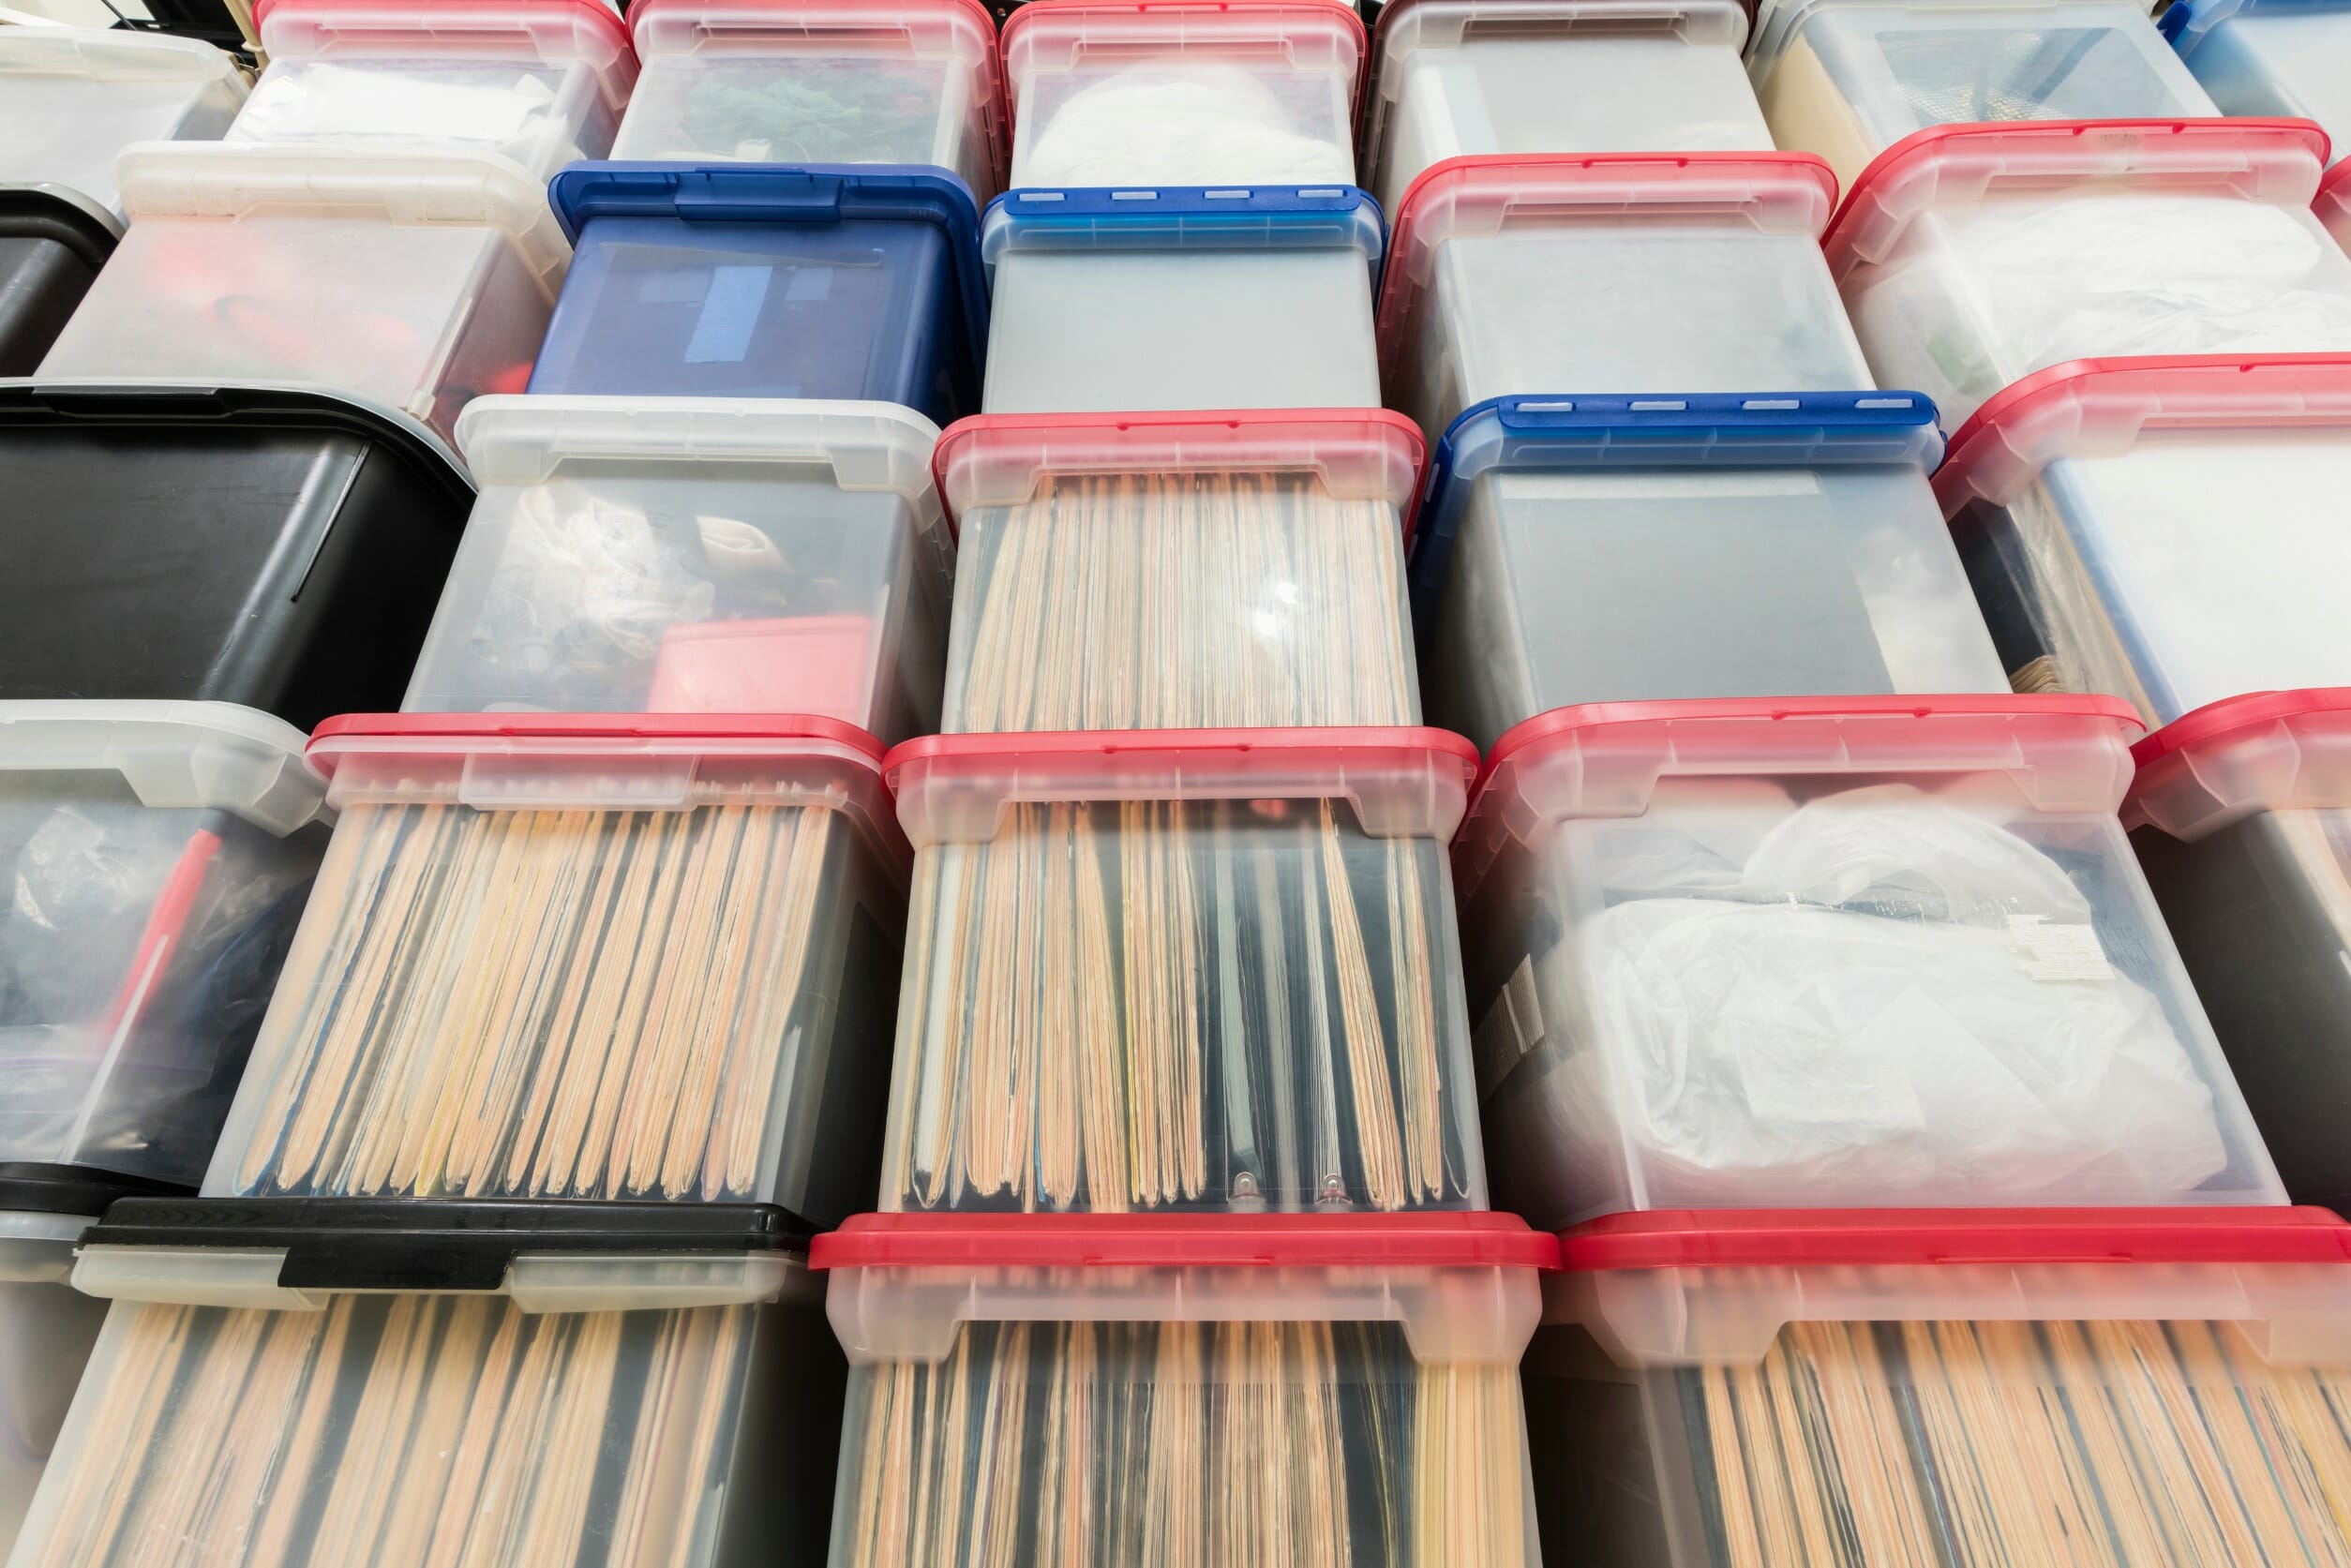 A stack of see-through plastic storage totes